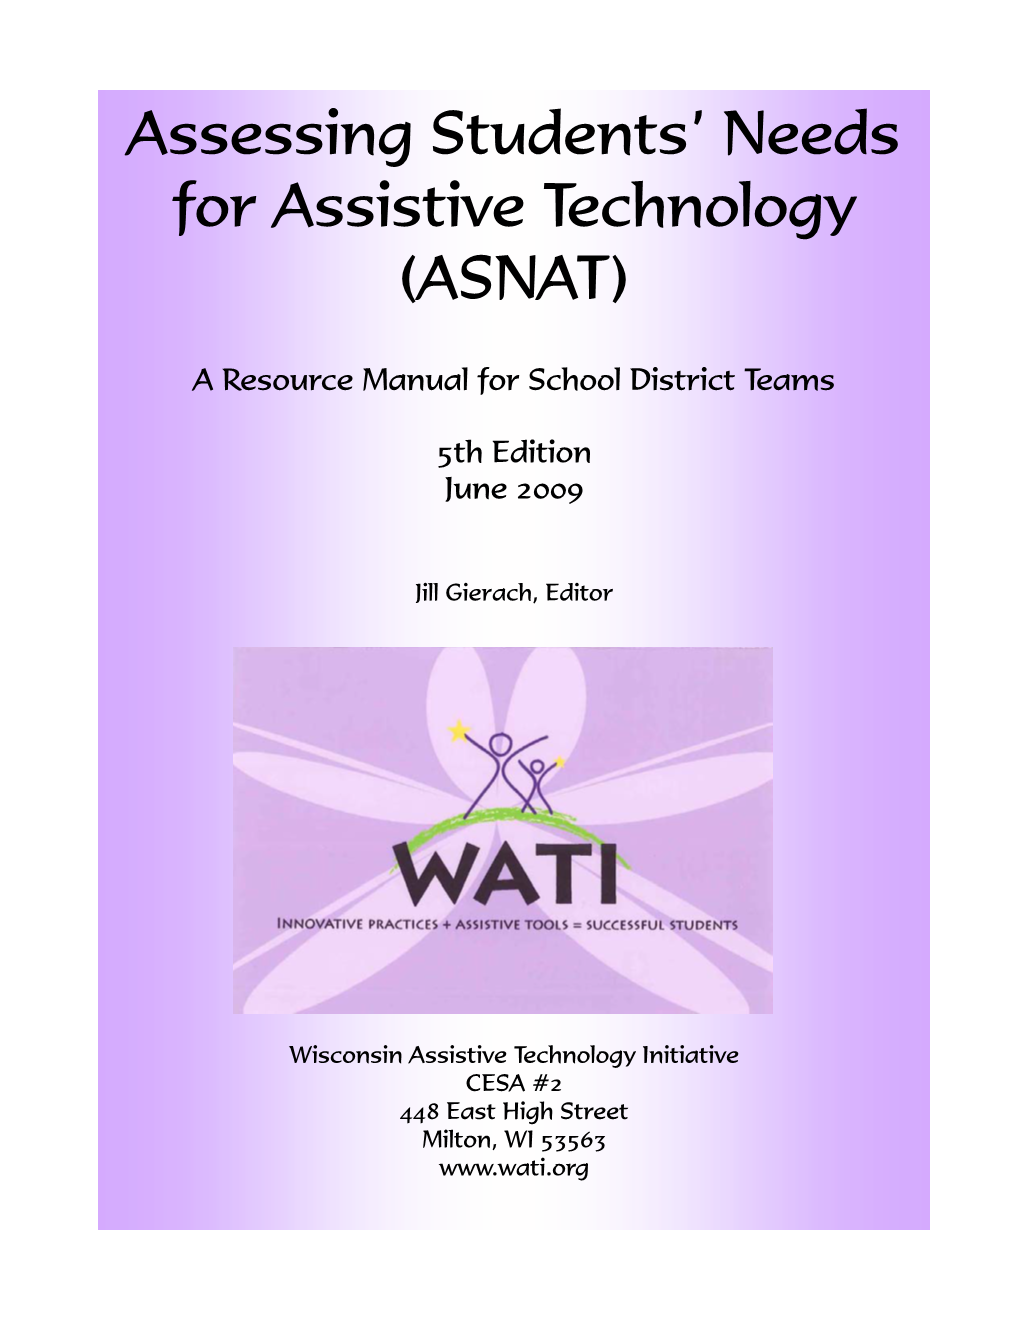 Assessing Students' Needs for Assistive Technology (ASNAT)